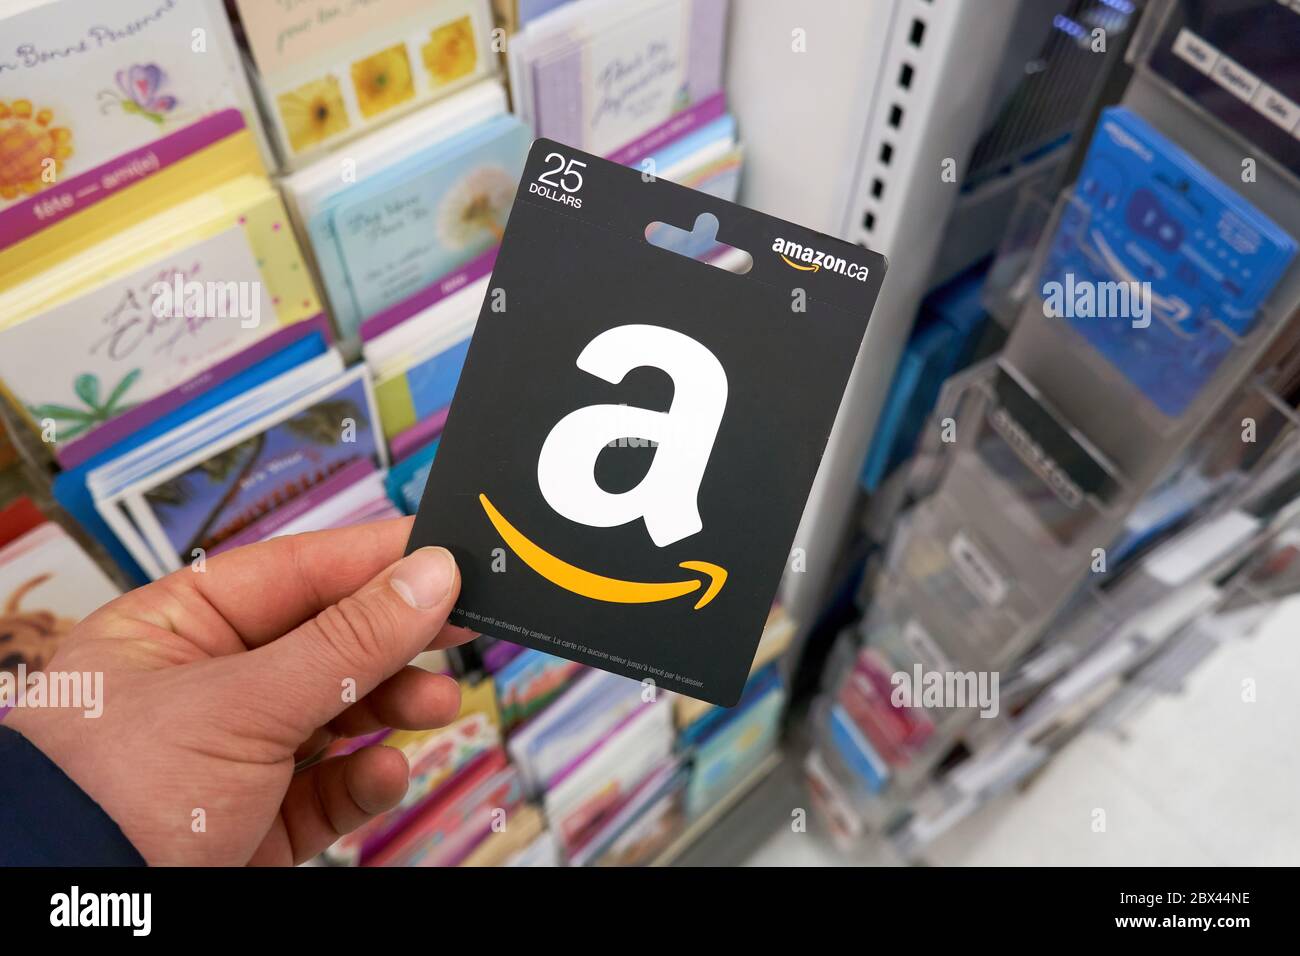 Amazon Gift Card High Resolution Stock Photography and Images - Alamy